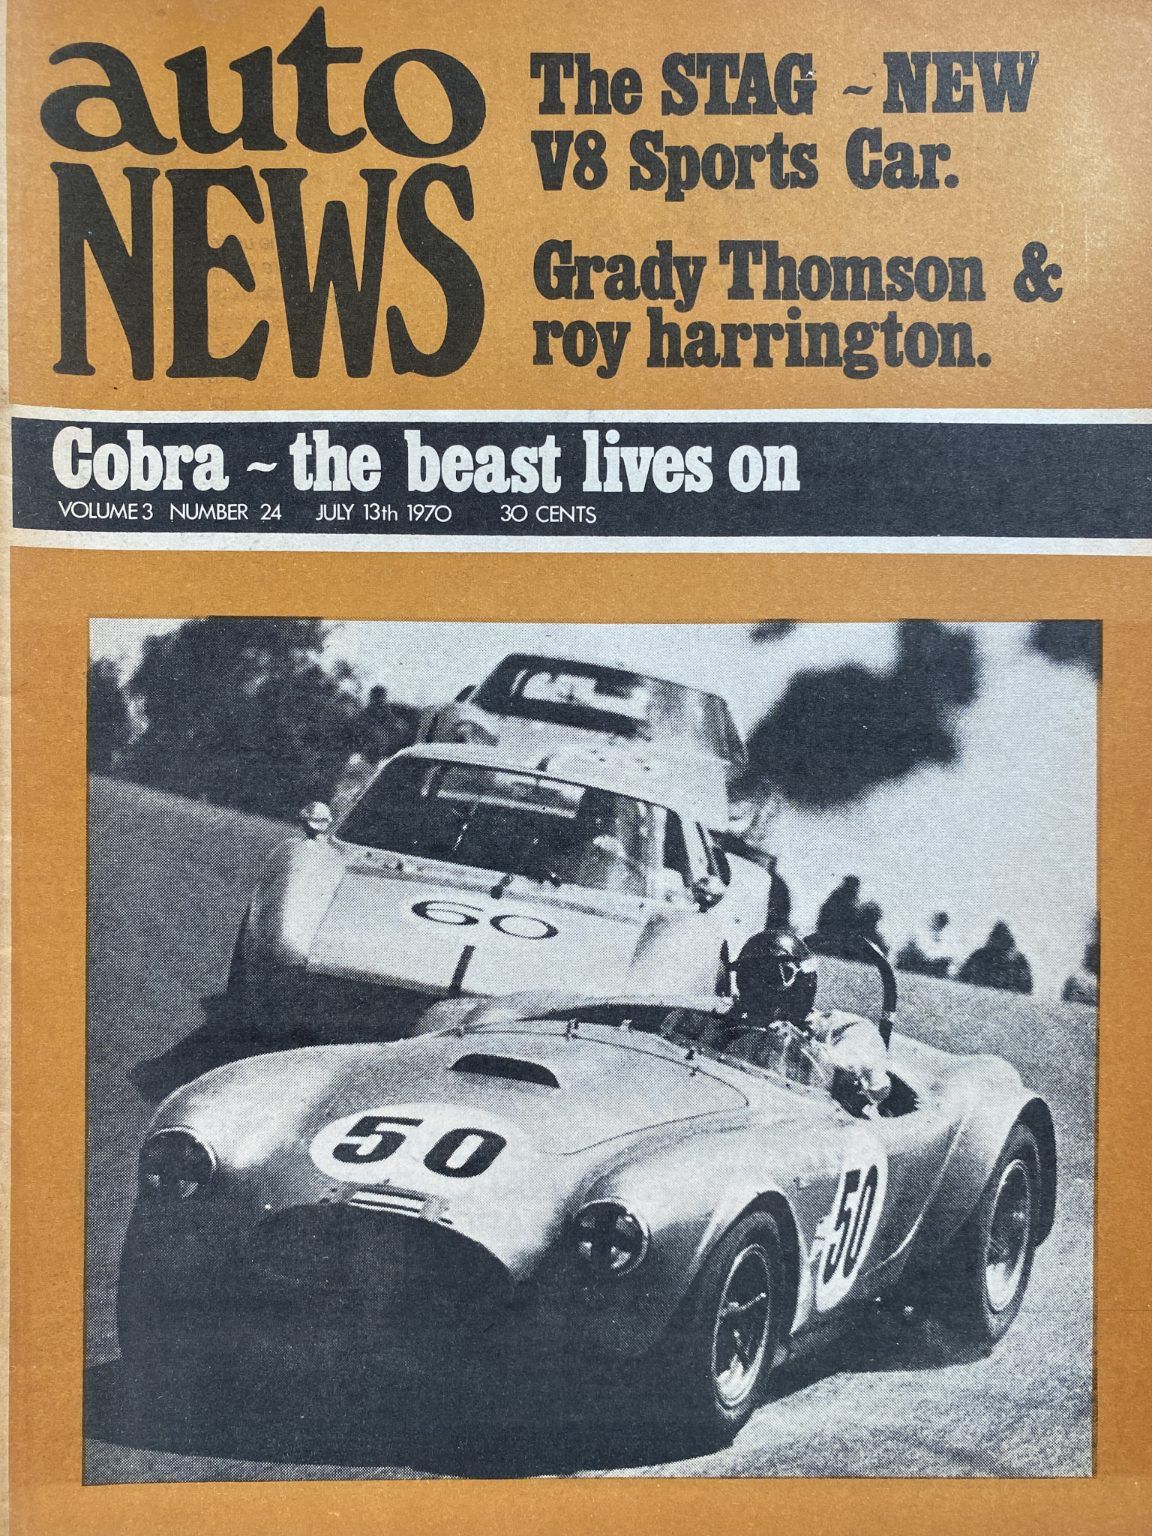 OLD MAGAZINE: Auto News - Vol. 3, Number 24, 13th July 1970